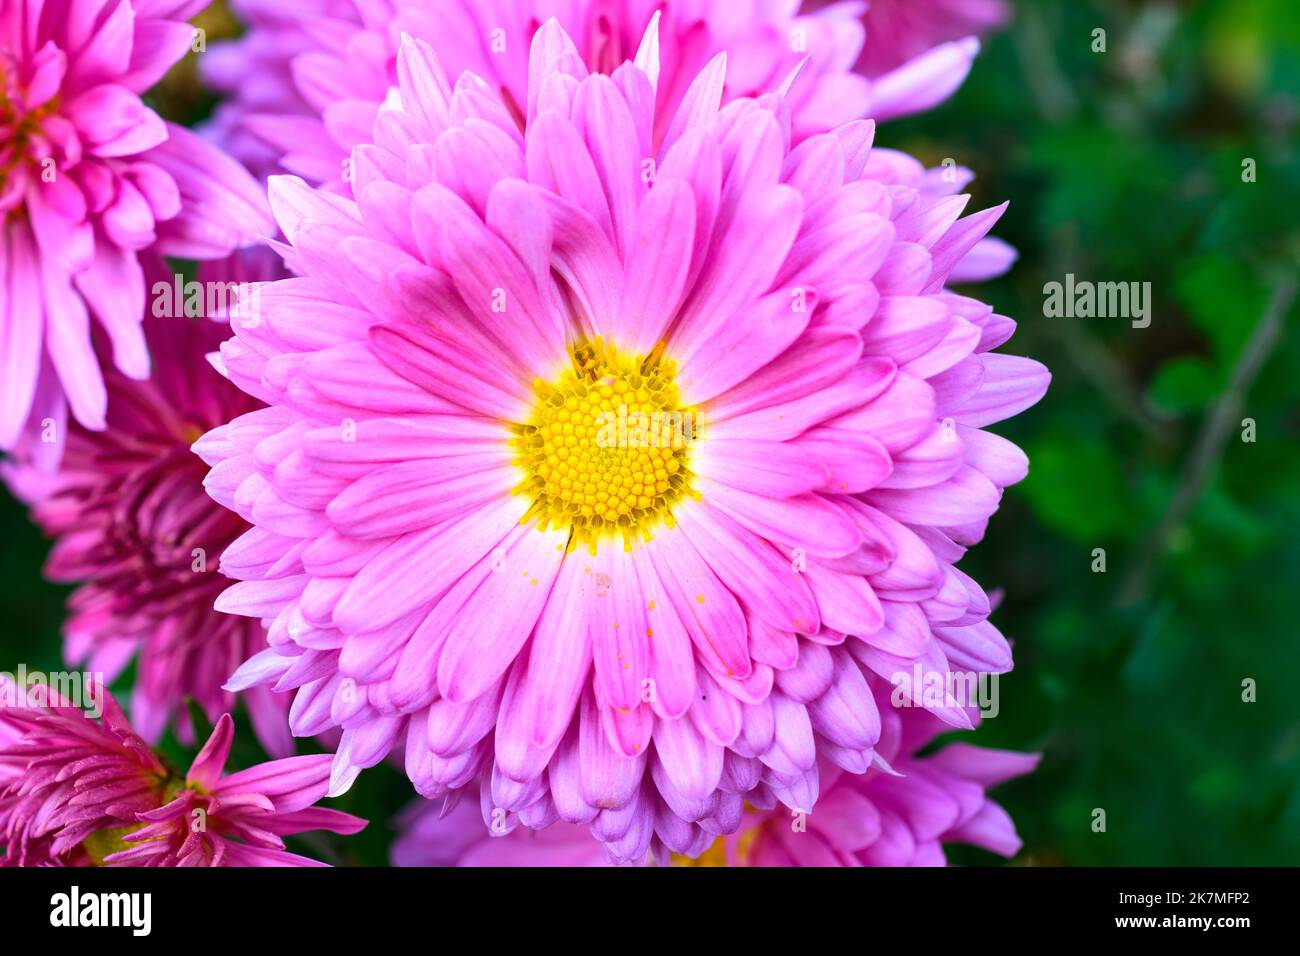 China aster pink and yellow flower, close-up Stock Photo